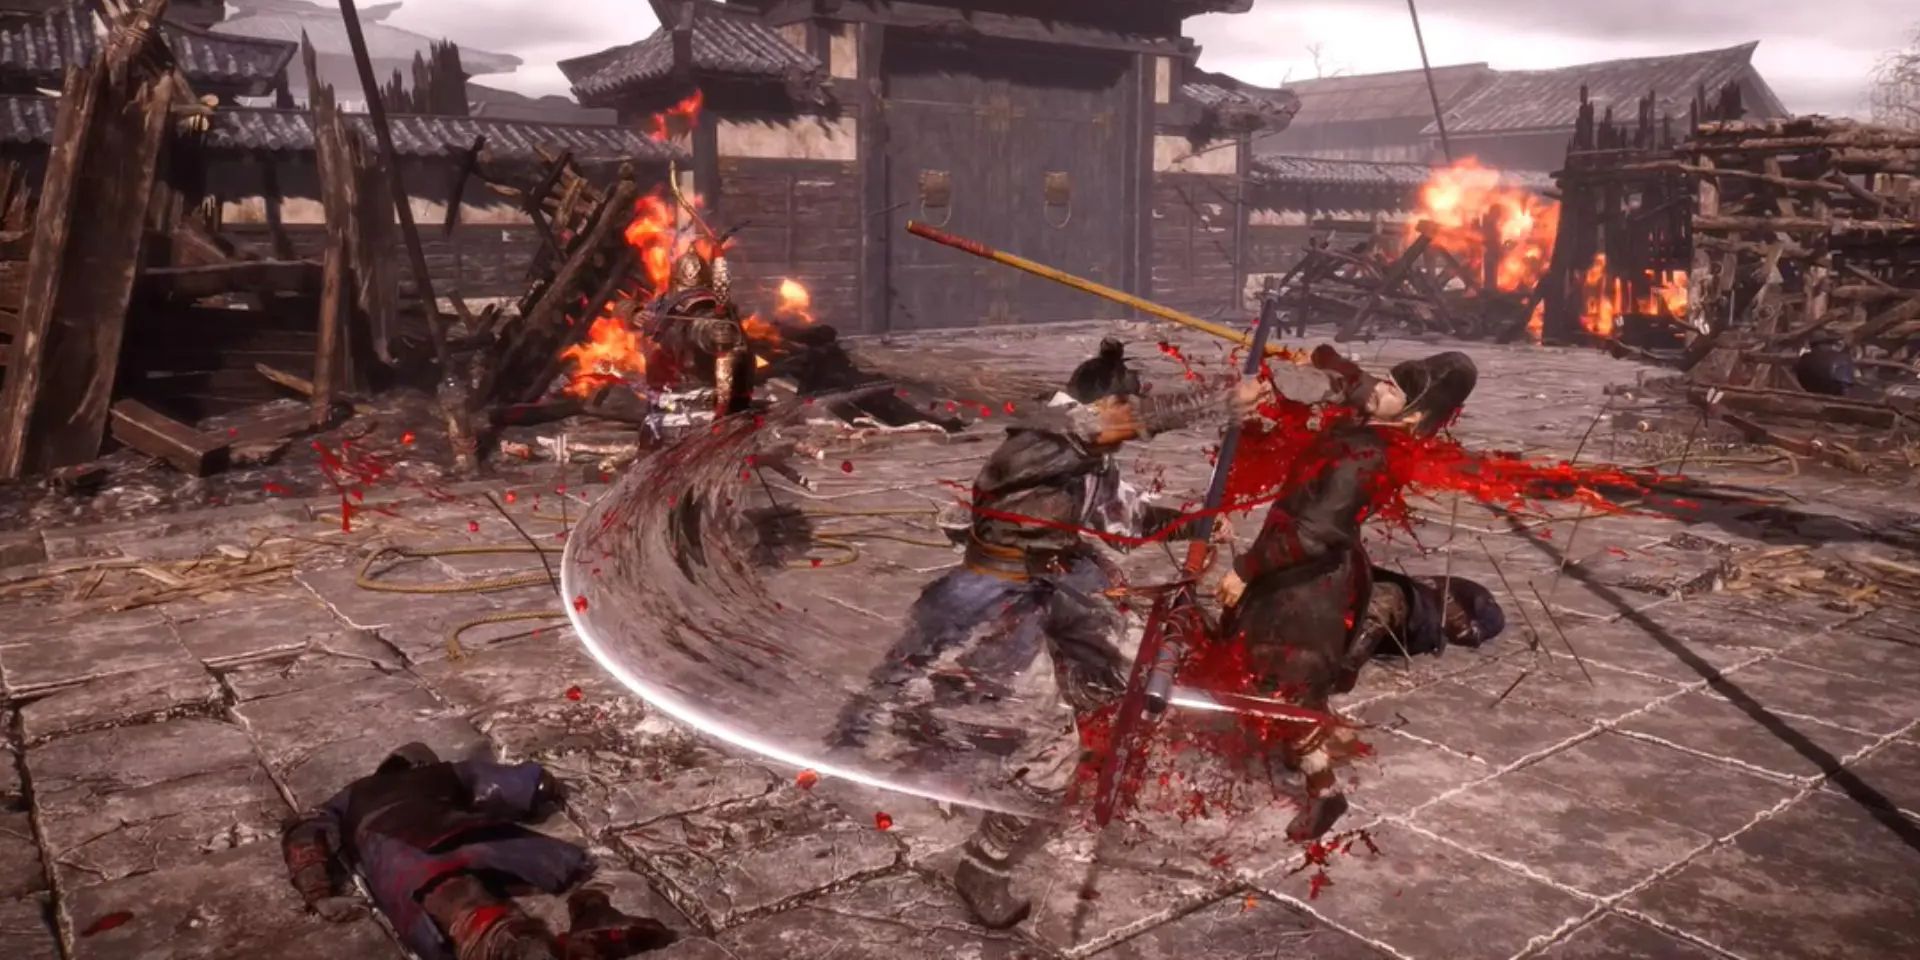 The player character swings a Polearm Podao in a wide arc against a black-clad enemy in Wo Long: Fallen Dynasty.